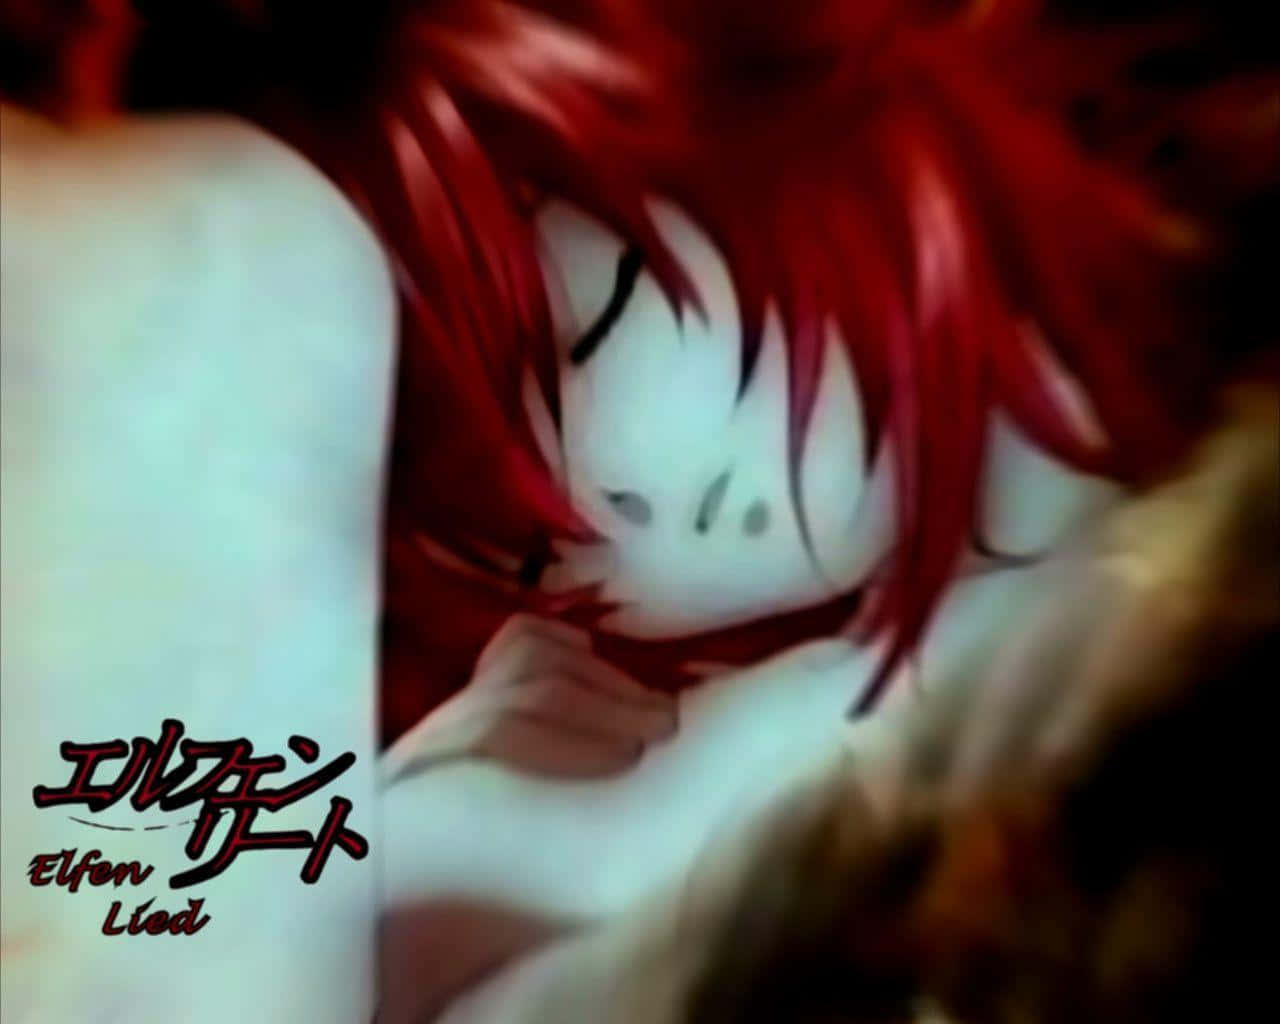 Find peace within the emotional story of Elfen Lied.